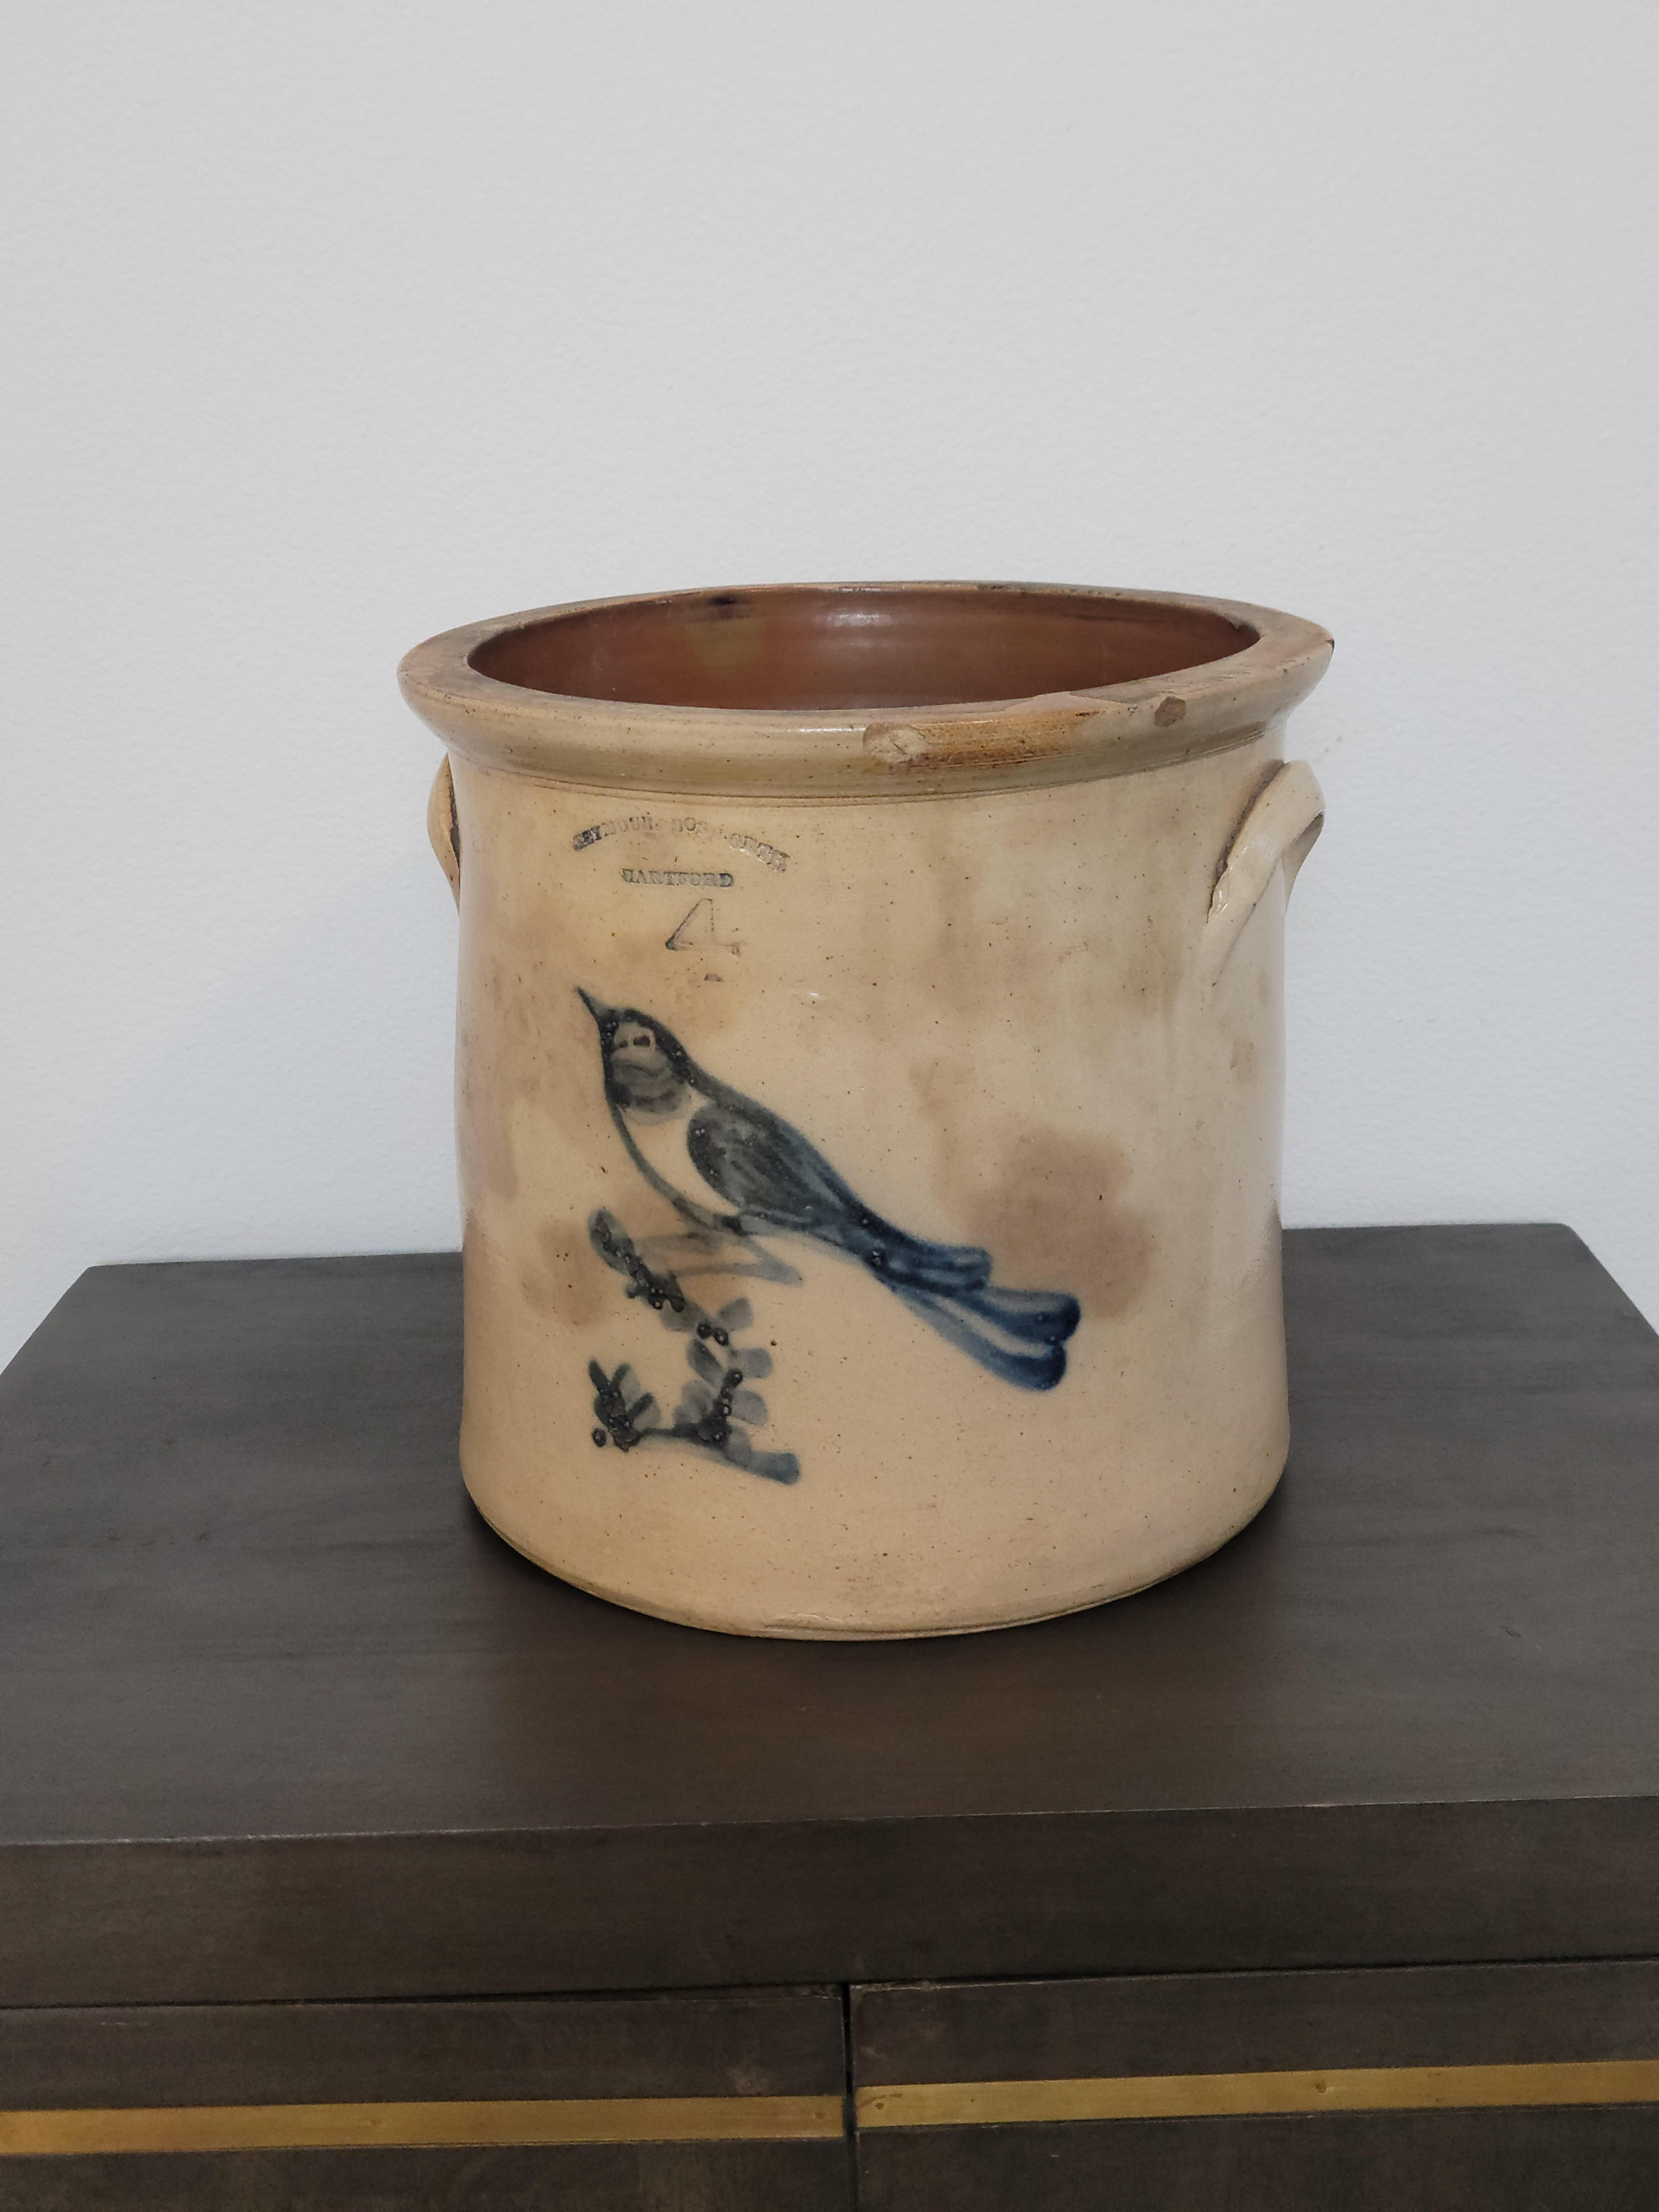 A most charming Seymour & Bosworth American four gallon stoneware pottery preserving crock, adorned with cobalt blue bird perched on branch. 
 
Born in the late 19th century, this antique crock, circa 1880, is the work of Israel Seymour and